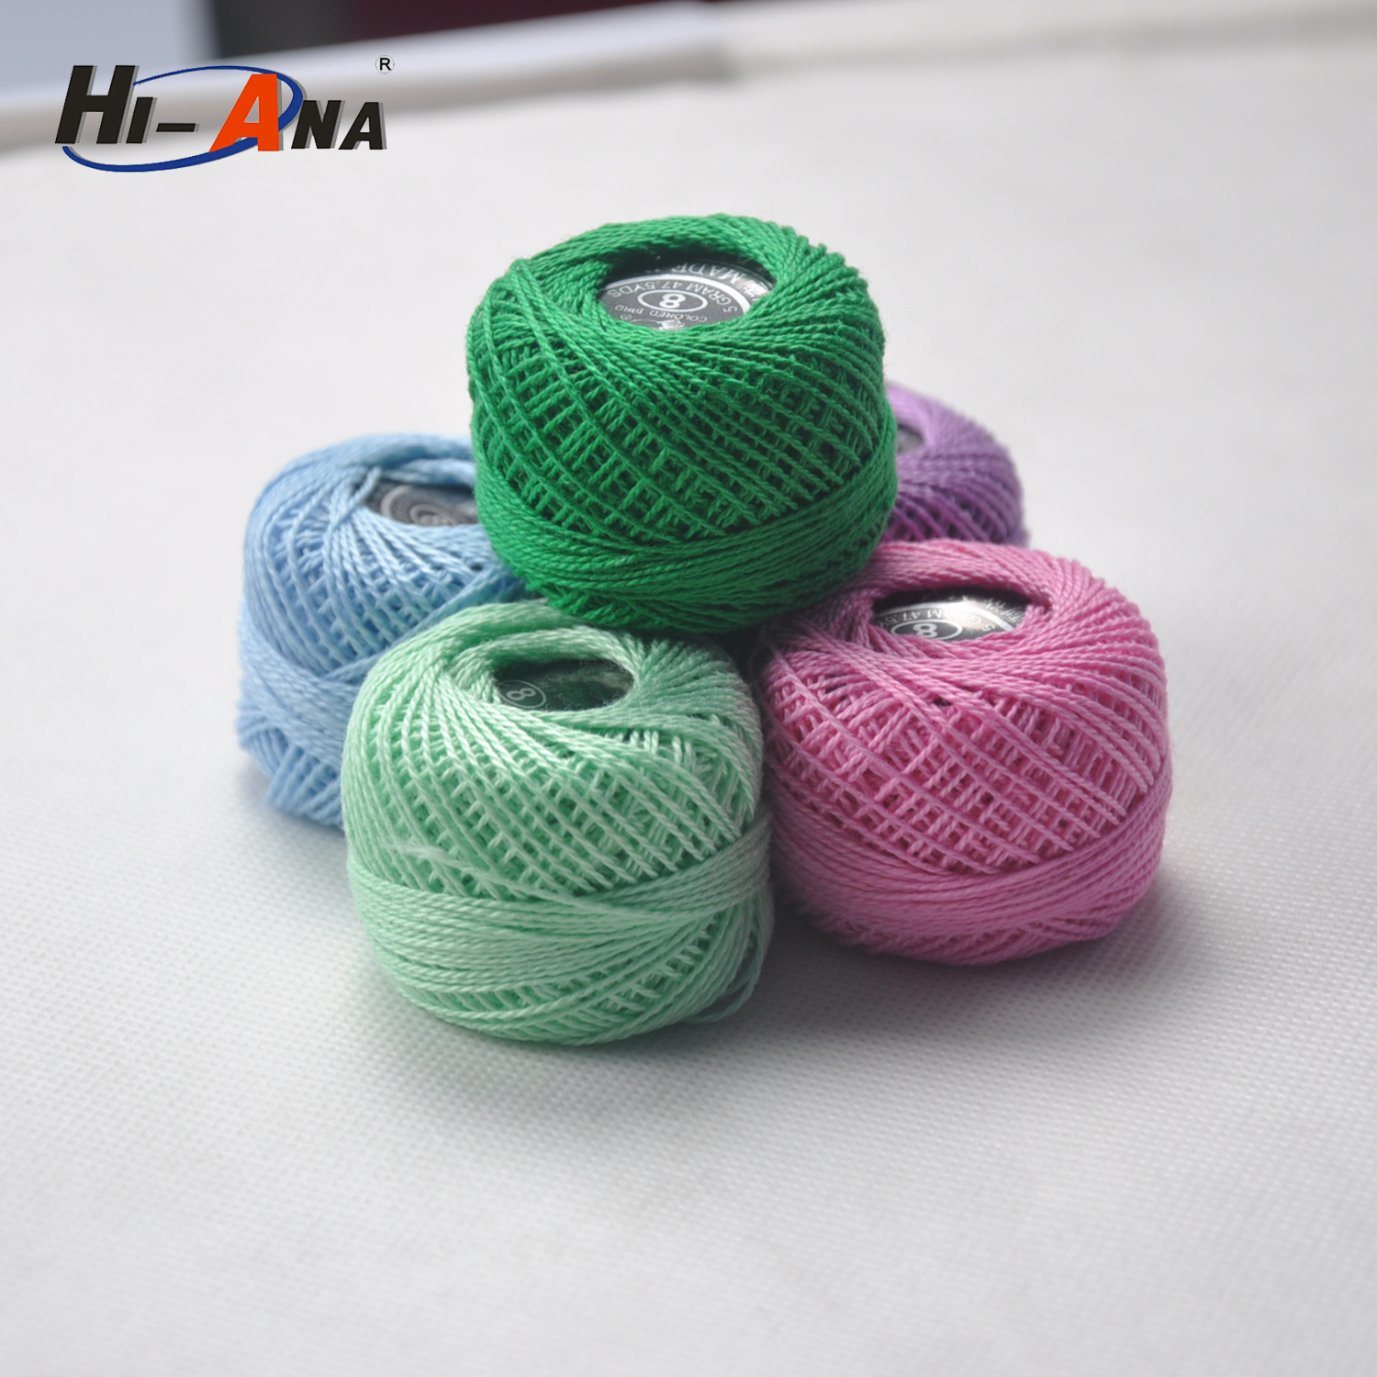 Fully Stocked Home Using Cotton Sewing Thread